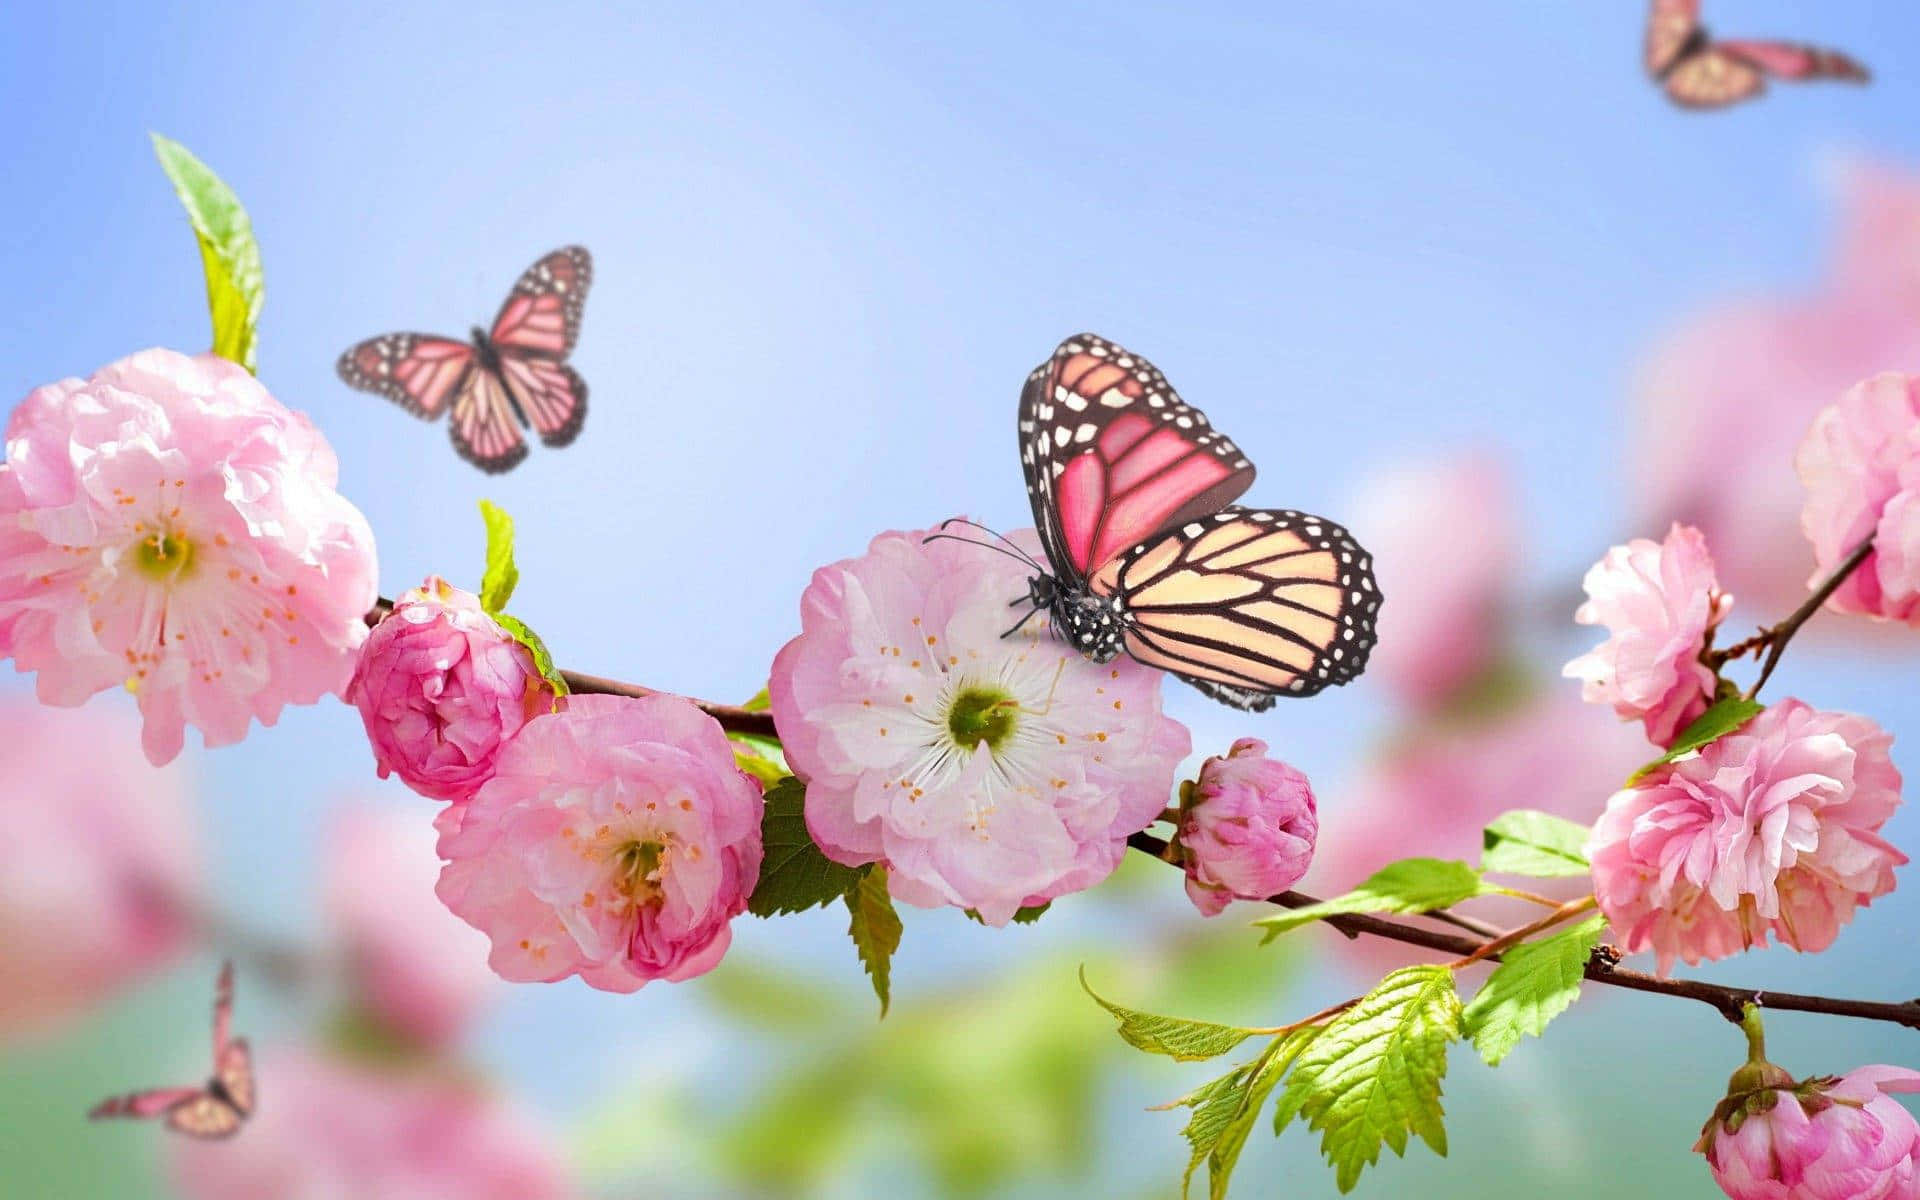 Pink Blossoms With Butterflies On Them